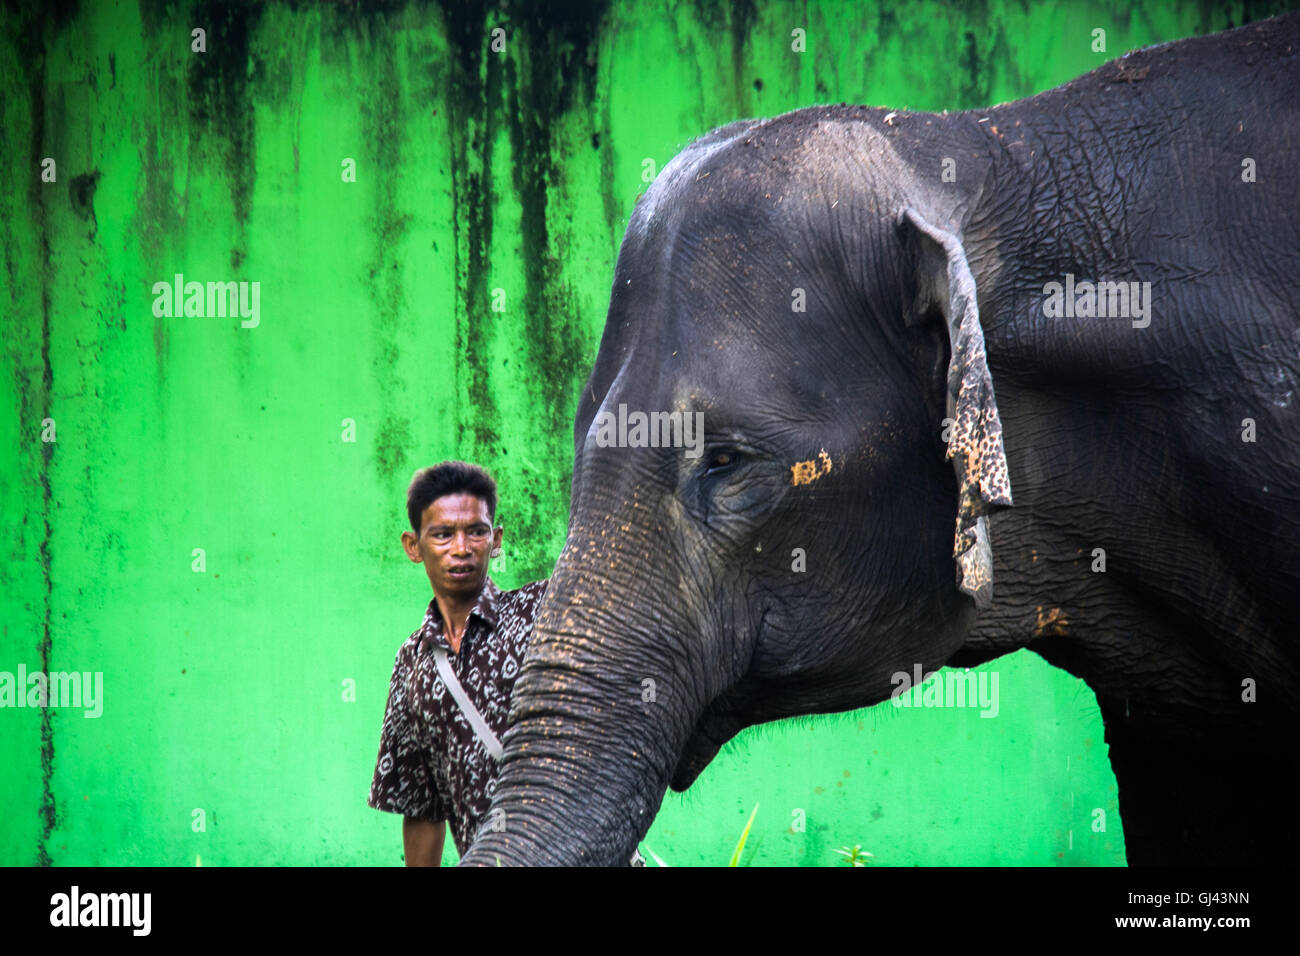 Medan, North Sumatra, Indonesia. 12th Aug, 2016. A guard with the Sumatran elephants were trained in Medan Zoo on August 12, 2016, Indonesia. At the World Elephant Day, habitat loss due to massive illegal logging and deforestation for palm oil plantation in Sumatra Island today only 1,724 Sumatran elephants remaining in the wild, down 39 percent from the 2007 population estimates. Credit:  Ivan Damanik/ZUMA Wire/Alamy Live News Stock Photo